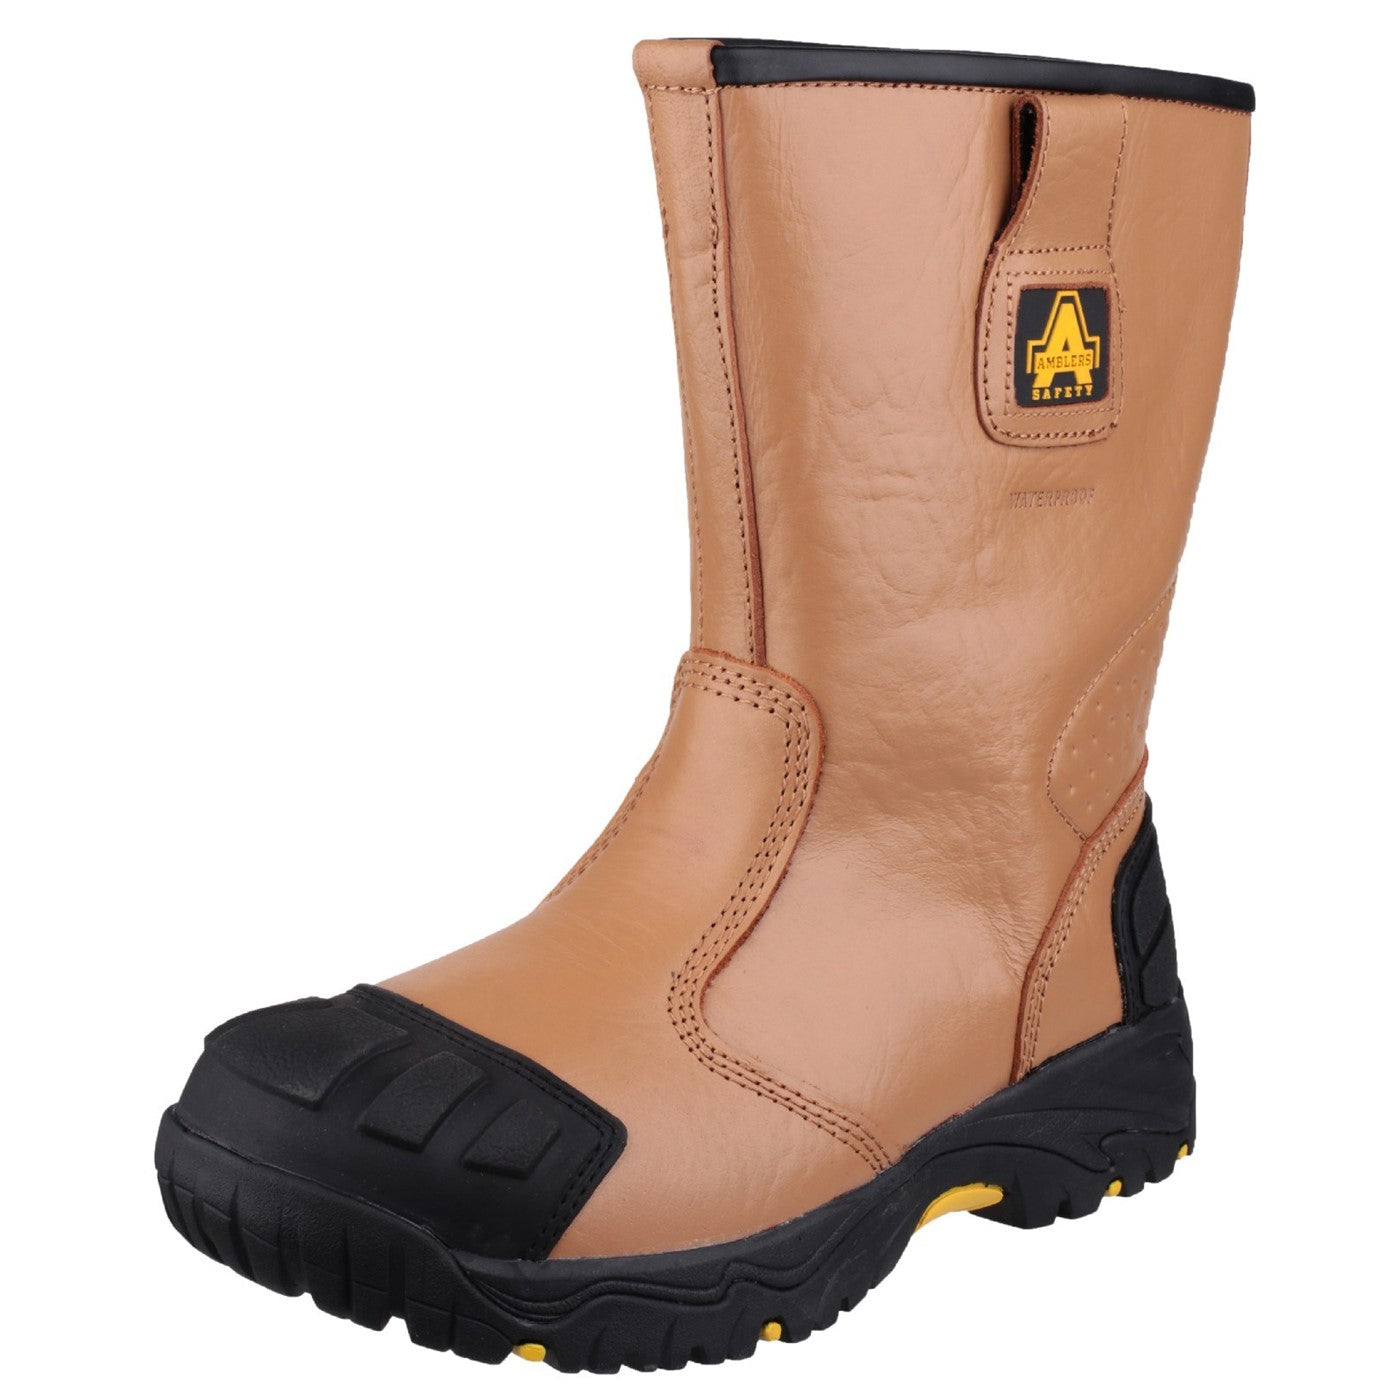 Men's Amblers Safety FS143 Waterproof pull on Safety Rigger Boot